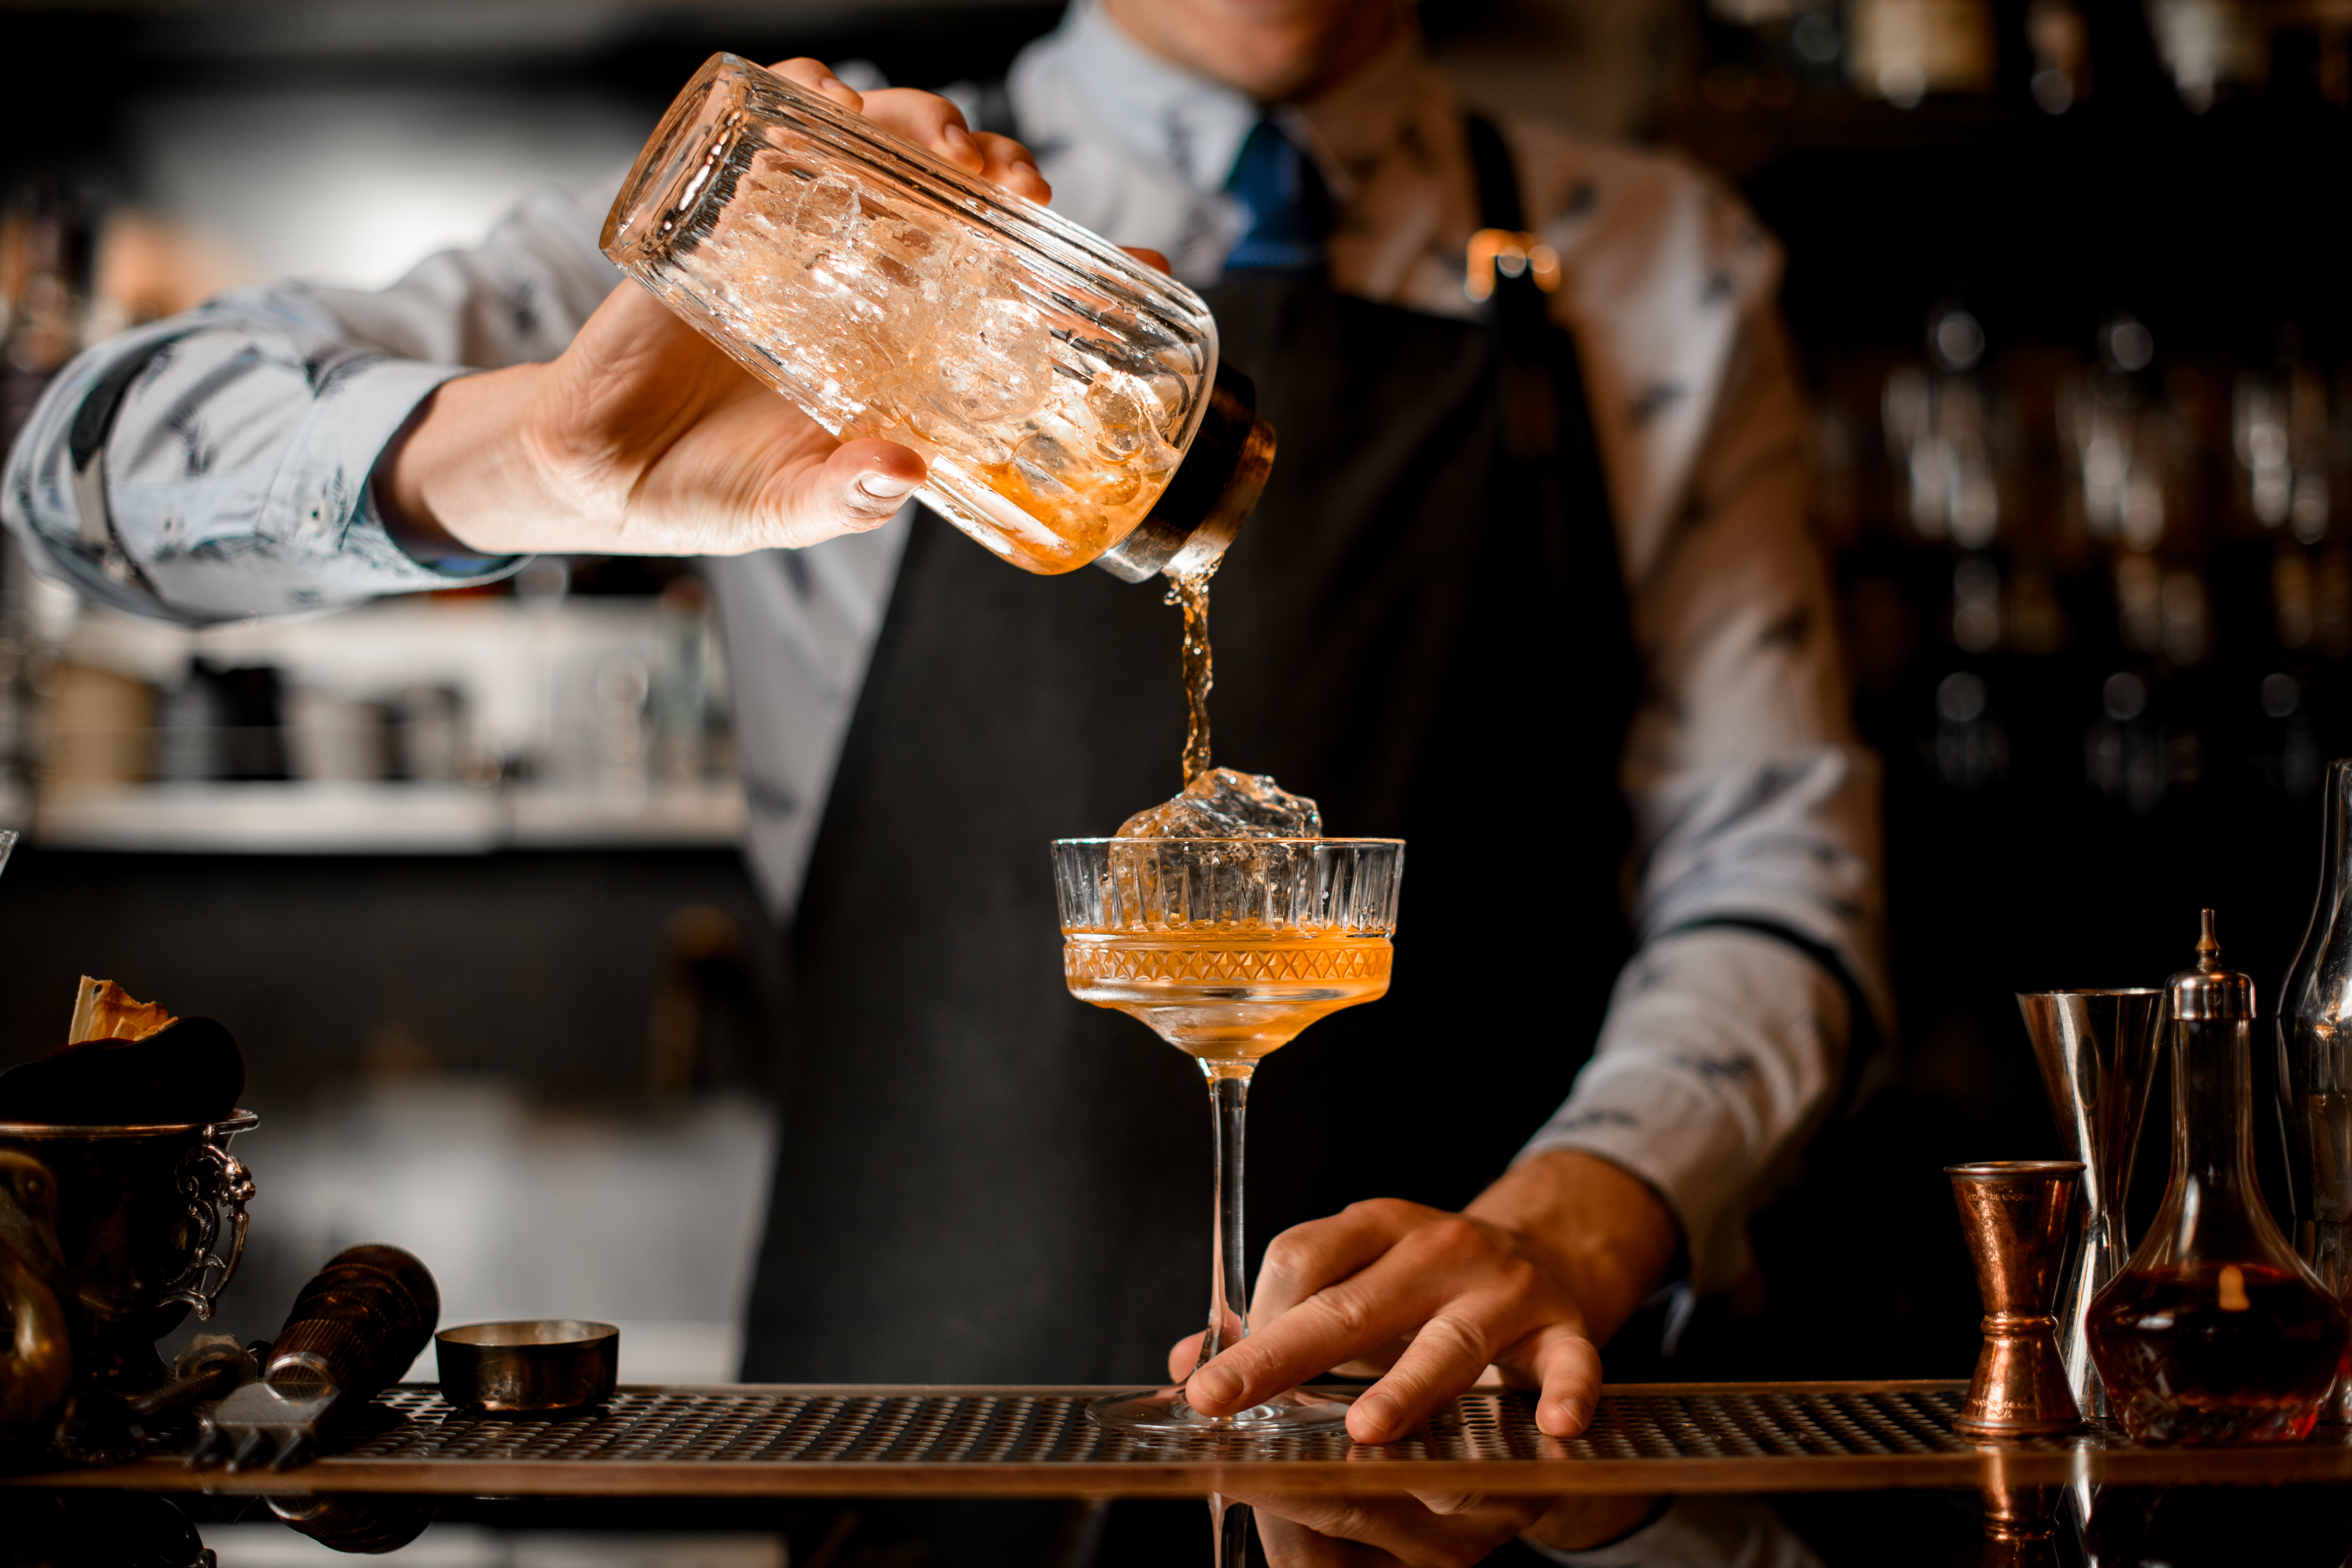 Barman gently pours finished cocktail from glass shaker into glass. | Source: Shutterstock